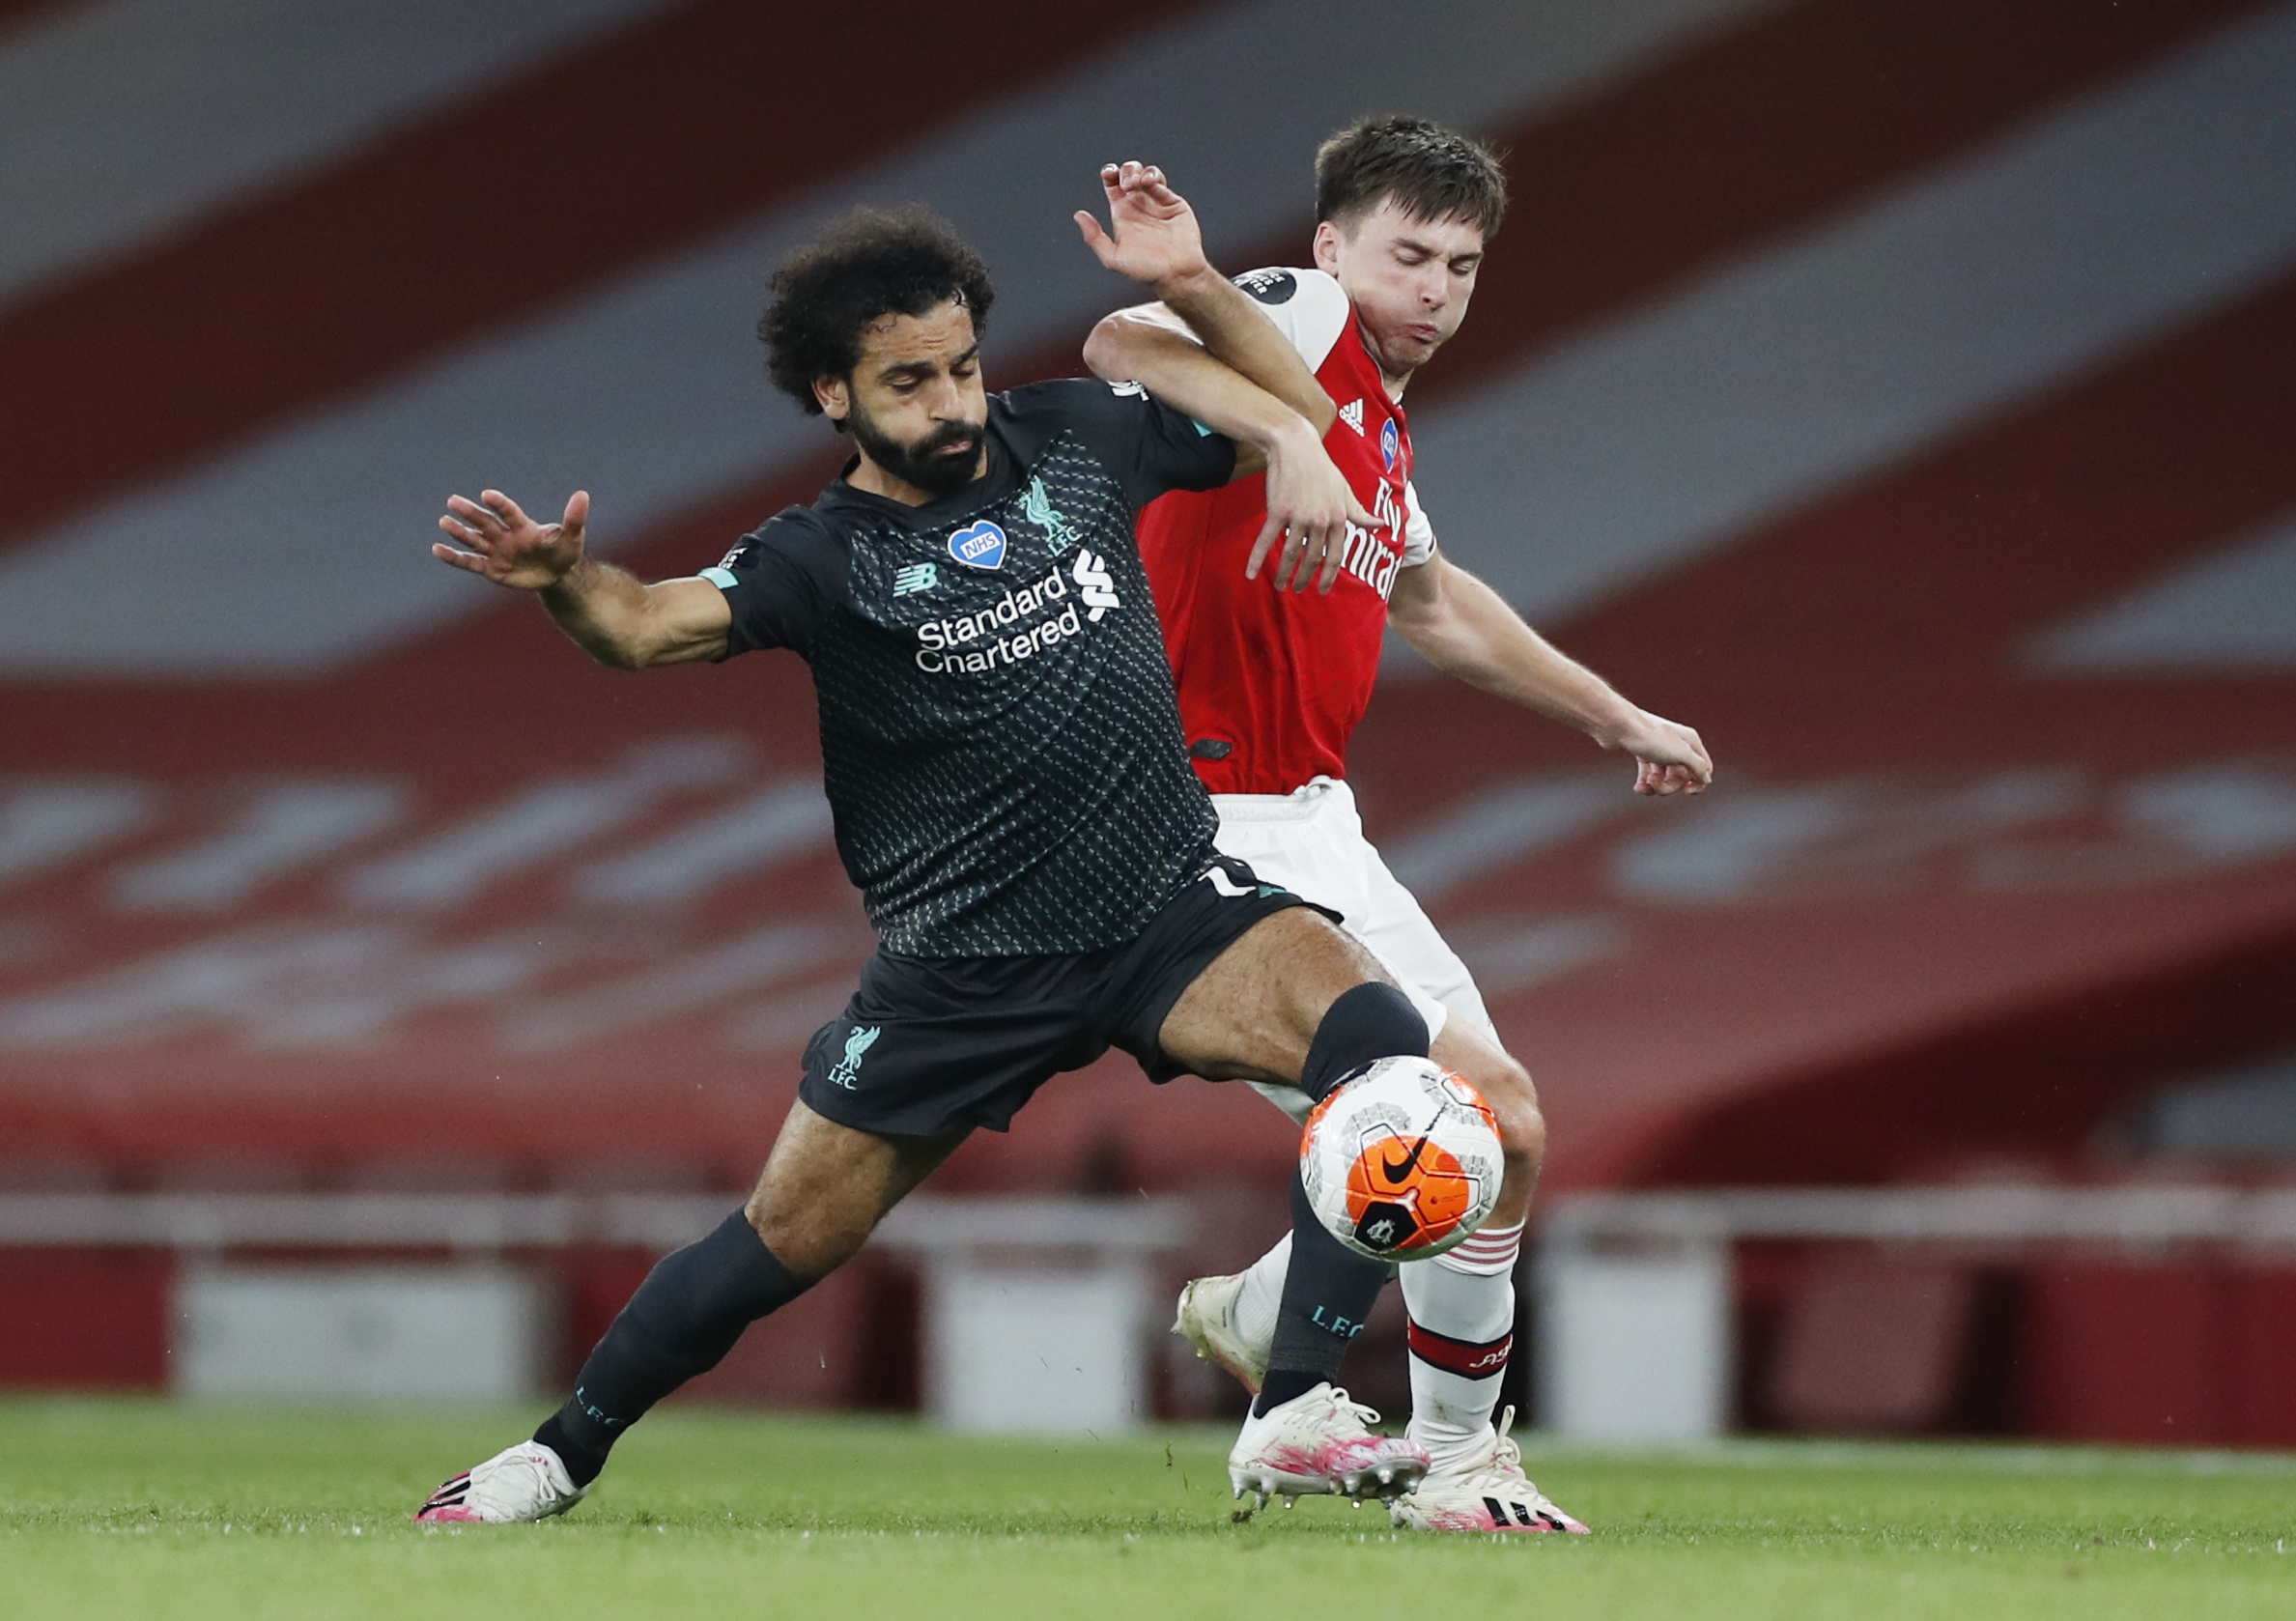 Liverpool's Mohamed Salah in action with Arsenal's Kieran Tierney, as play resumes behind closed doors following the outbreak of the coronavirus disease (COVID-19). Photo: Reuters